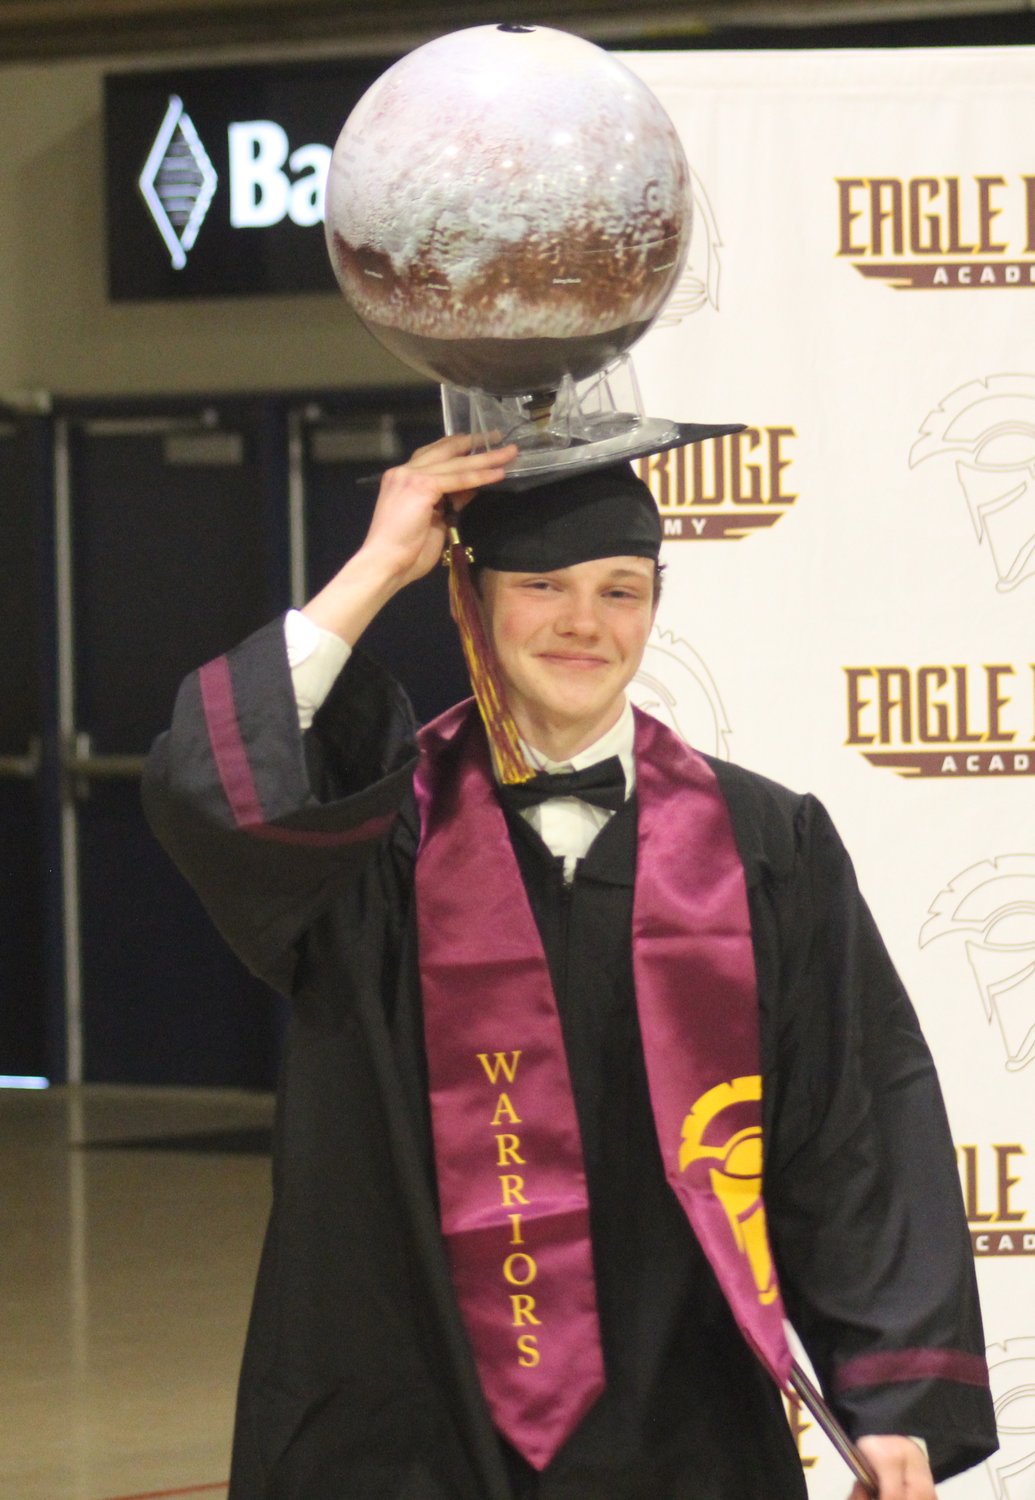 Eagle Ridge graduate Nathaniel Hershey has one hand on the diploma and one hand on his &quot;tassel&quot; at the school's commencement program at Bank of Colorado Arena in Greeley May 18.